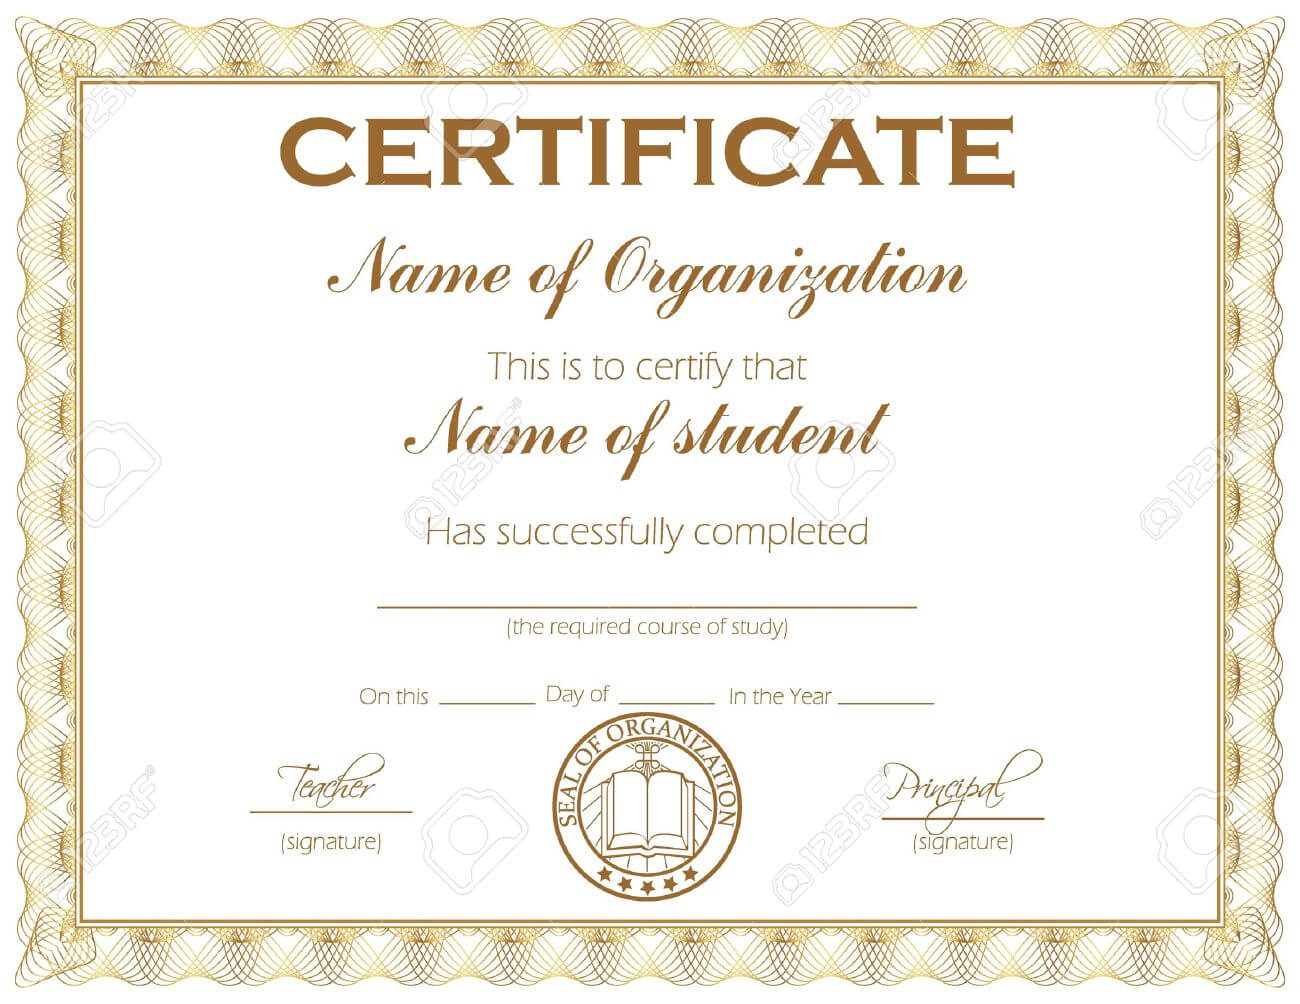 General Purpose Certificate Or Award With Sample Text That Can.. For Promotion Certificate Template